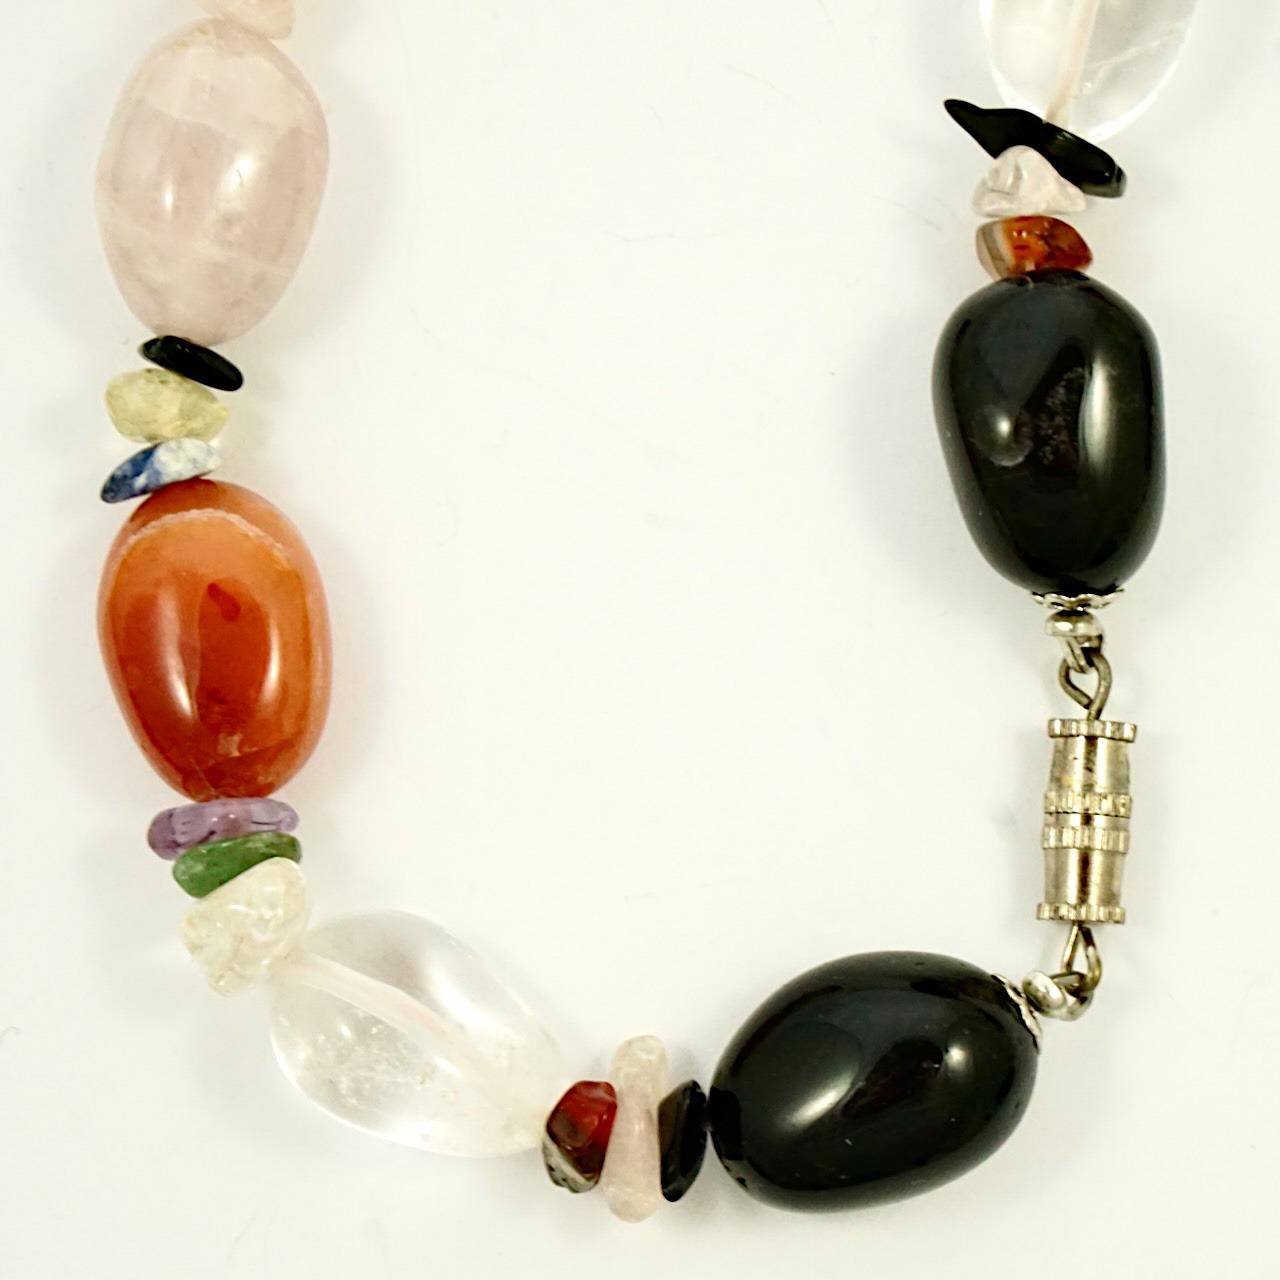 Polished Gemstone Necklace including Rose Quartz, Amethyst and Agate Beads For Sale 3